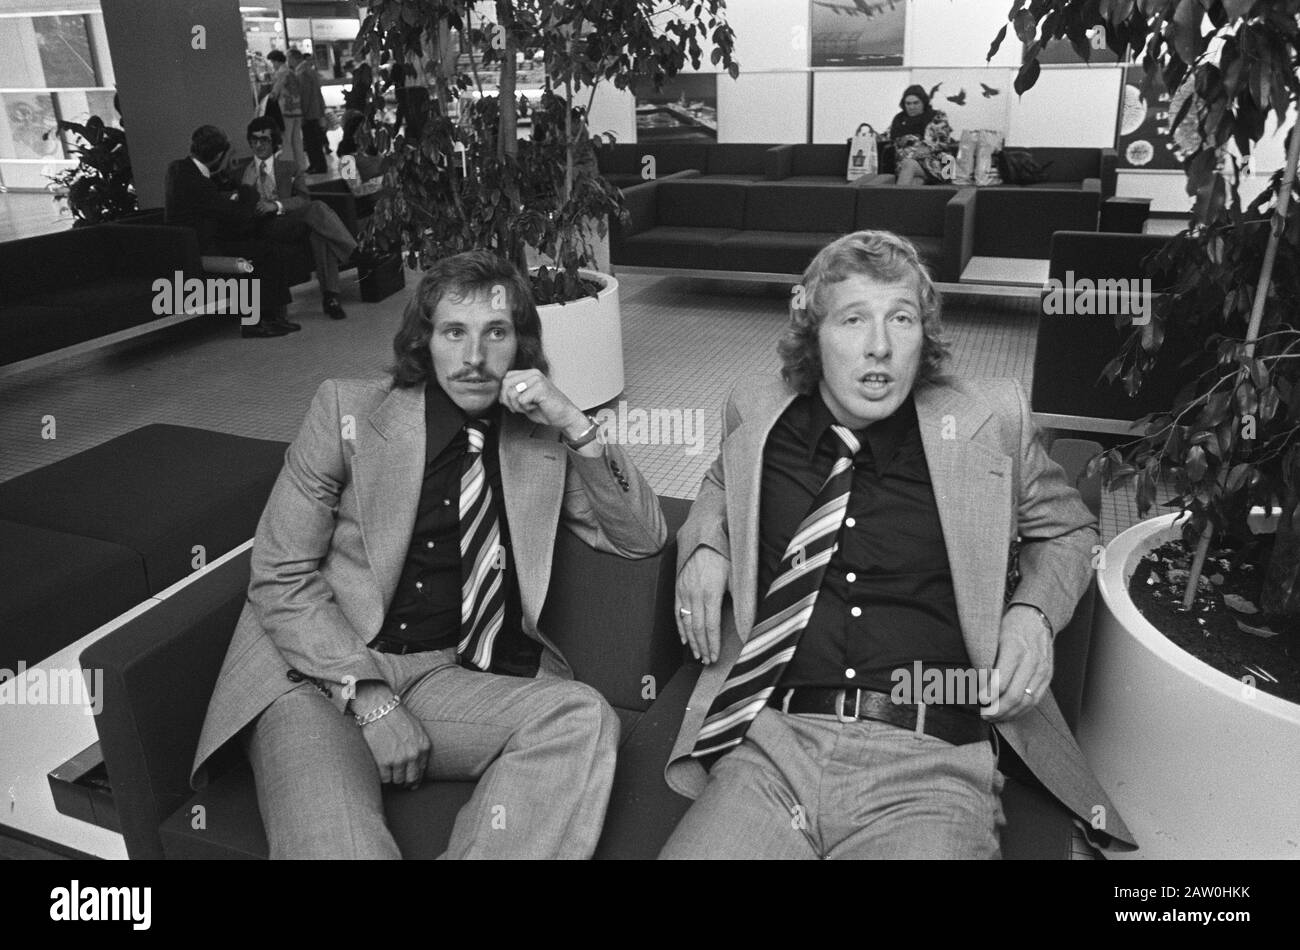 Dutch soccer team leaves for Oslo, Epi Drost and Jan Jeuring (right) Date: September 10, 1973 Keywords: football, teams, sports Person Name: Epi Drost Stock Photo